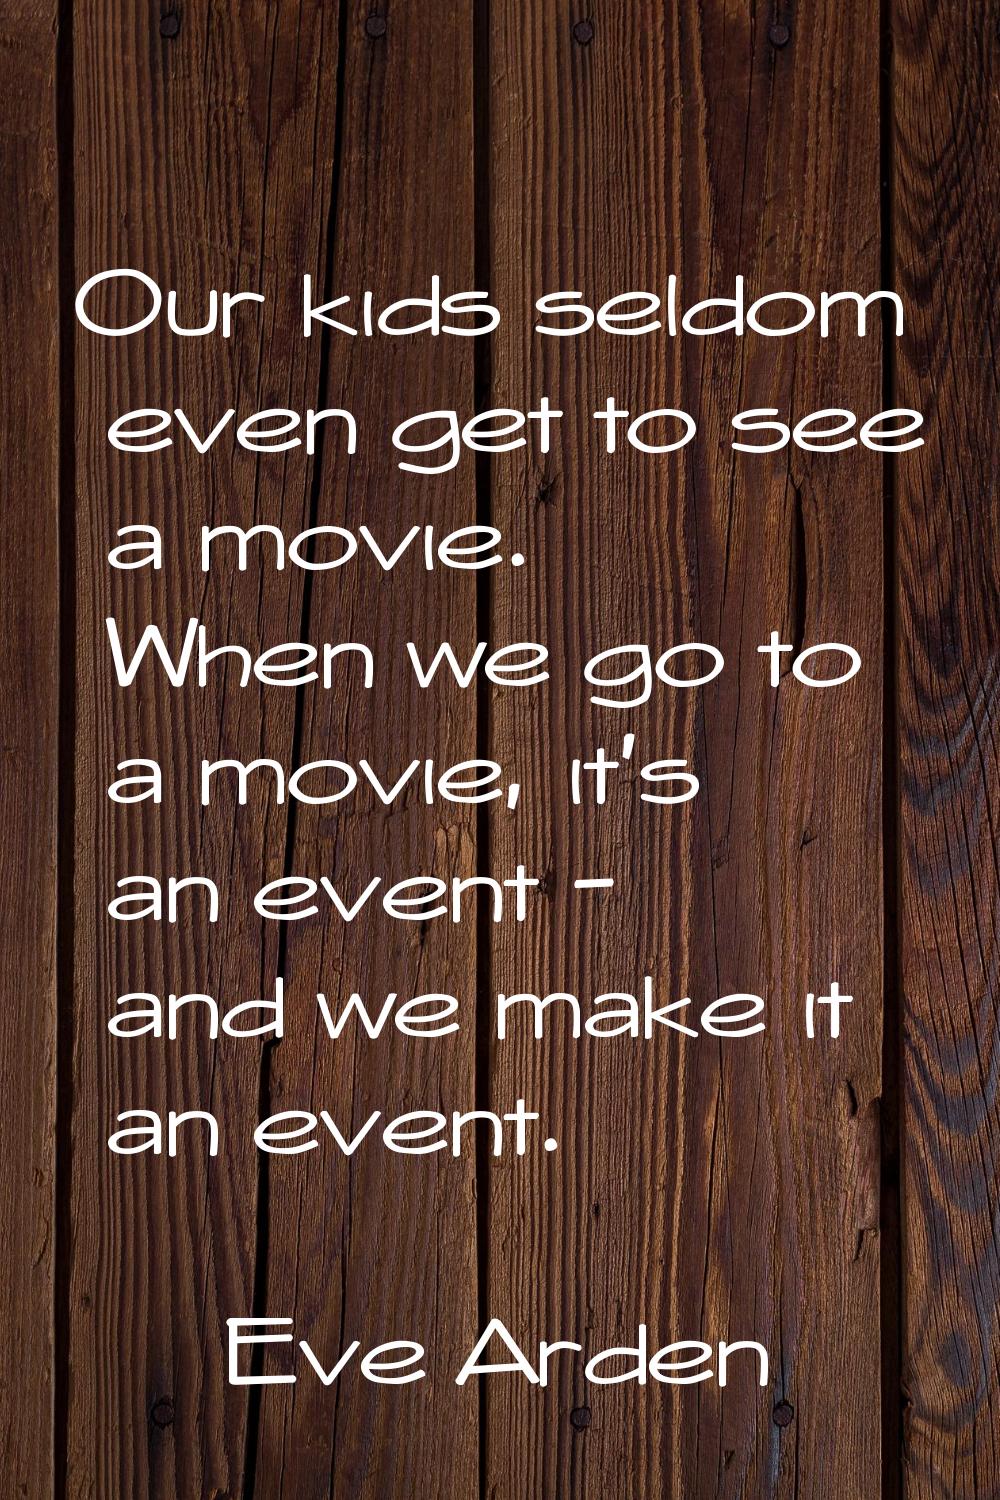 Our kids seldom even get to see a movie. When we go to a movie, it's an event - and we make it an e